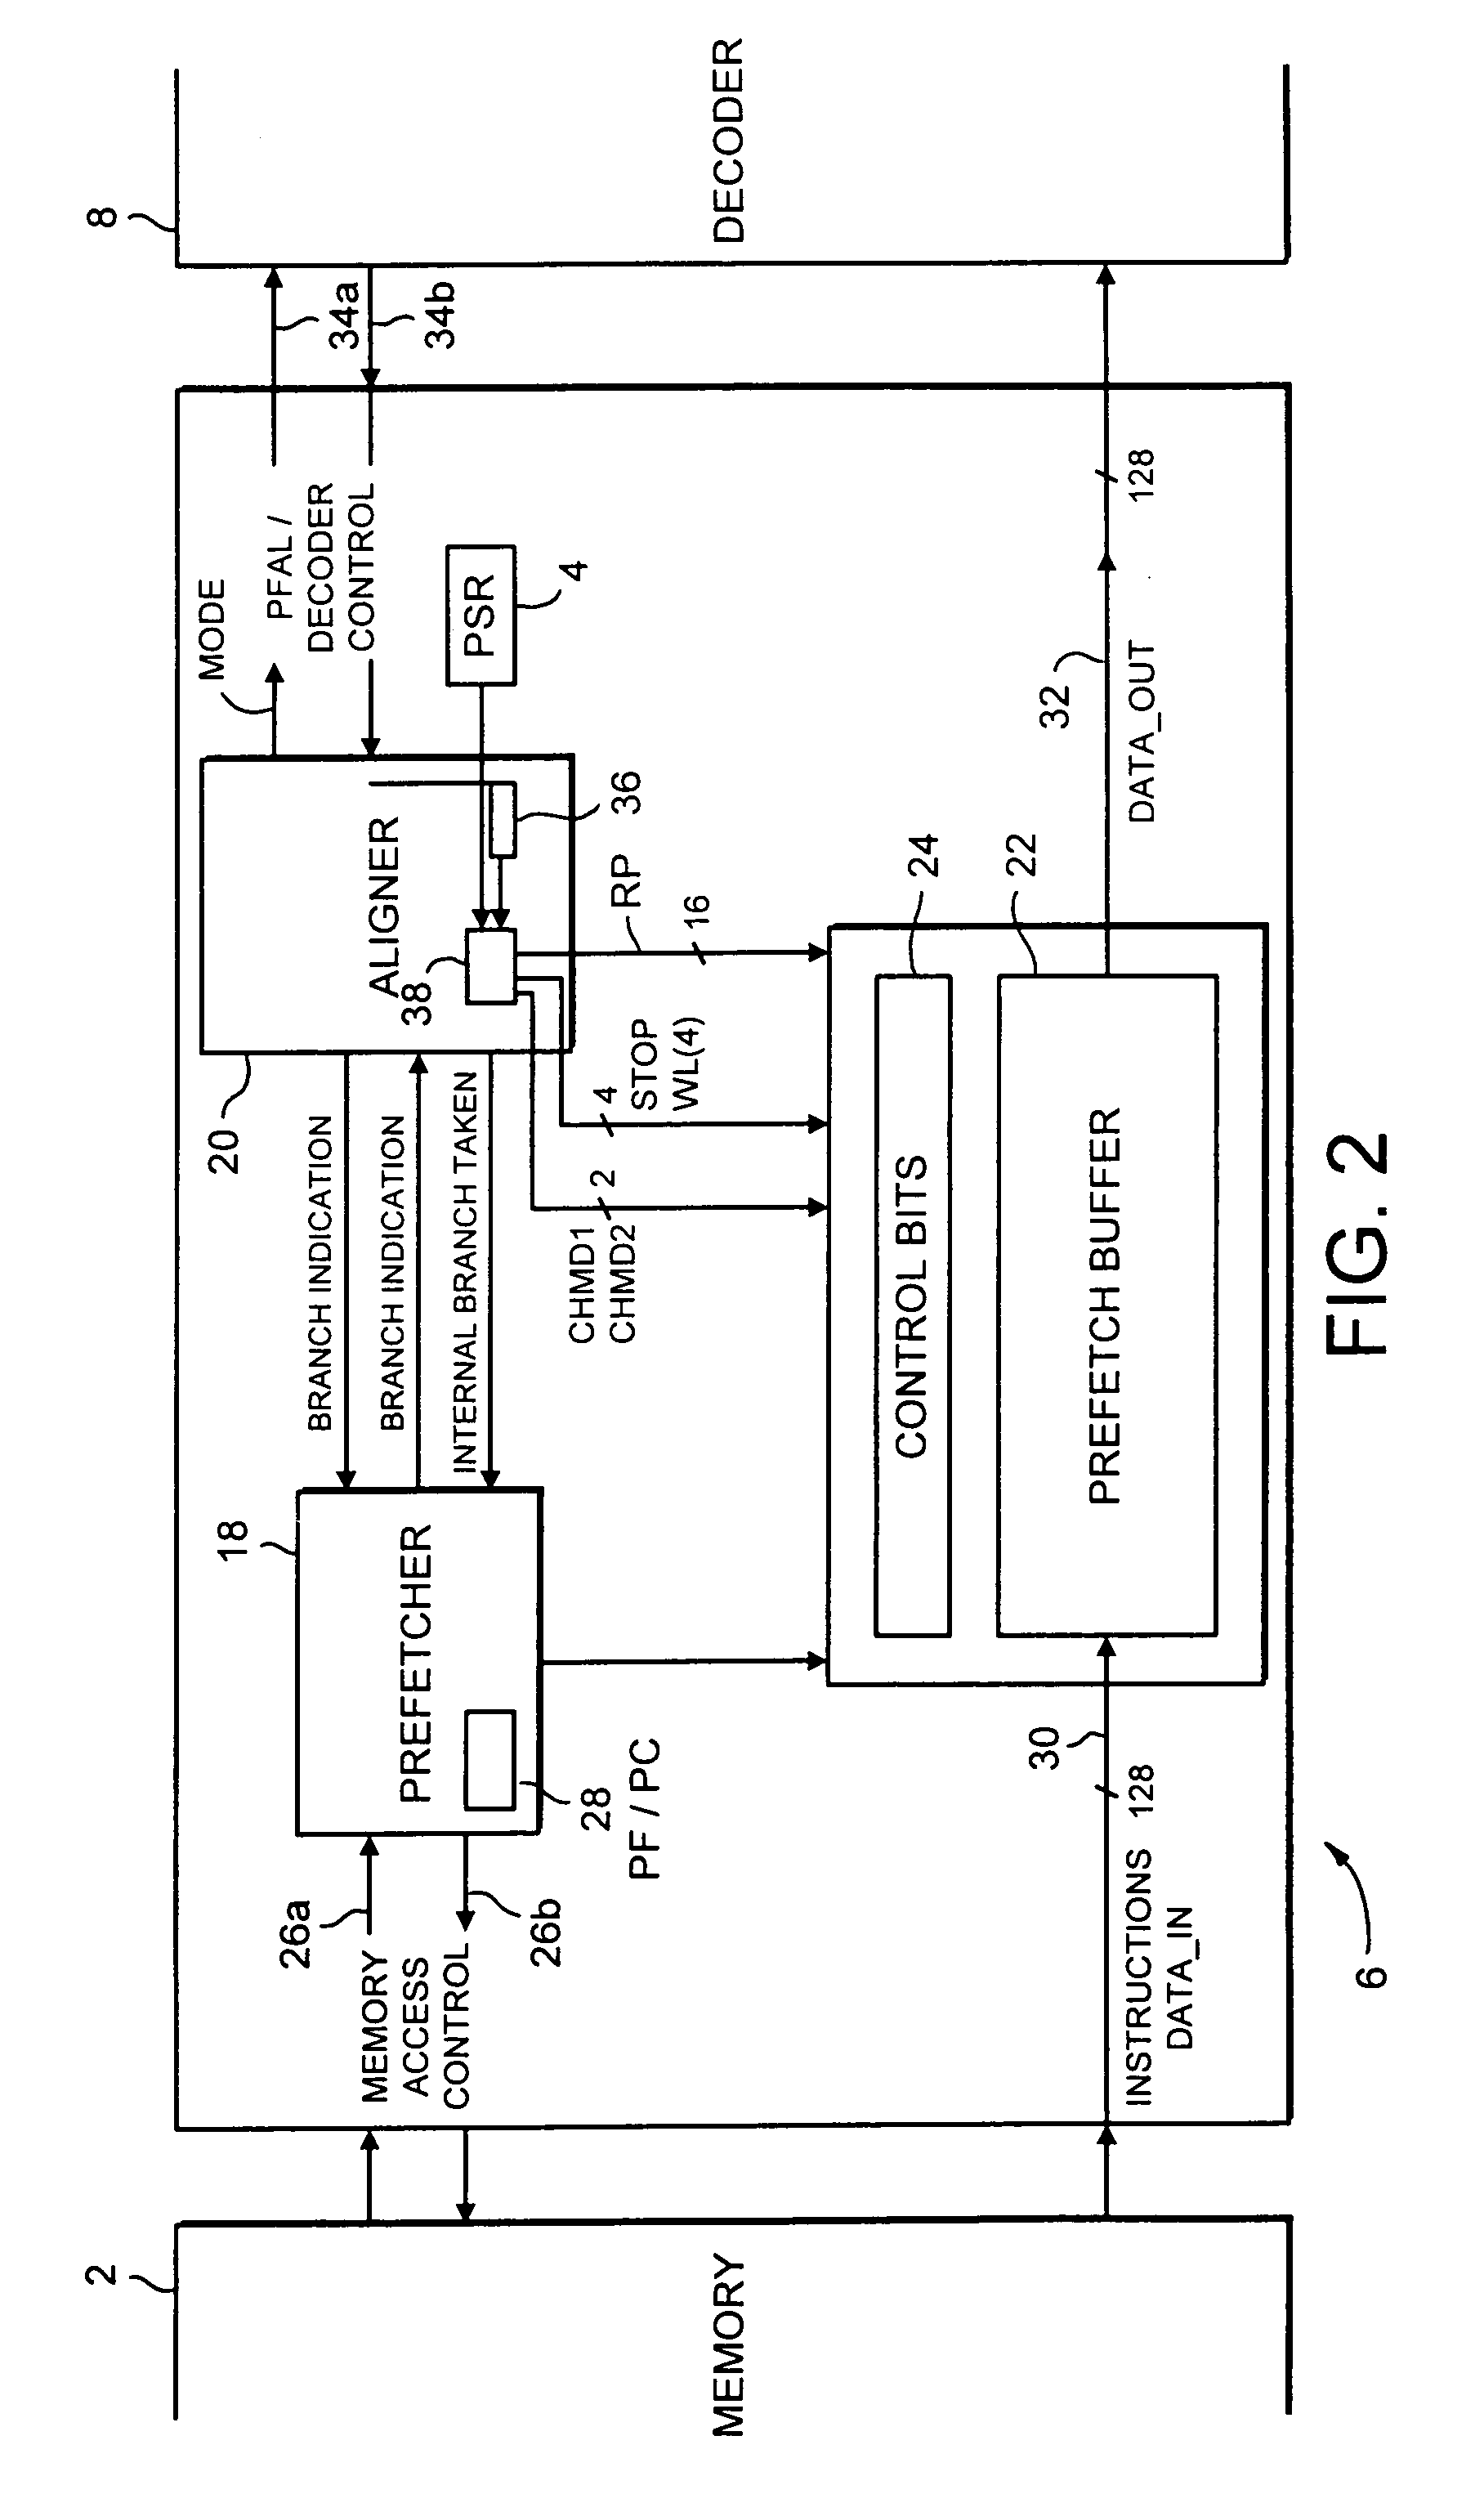 Multiple execution of instruction loops within a processor without accessing program memory